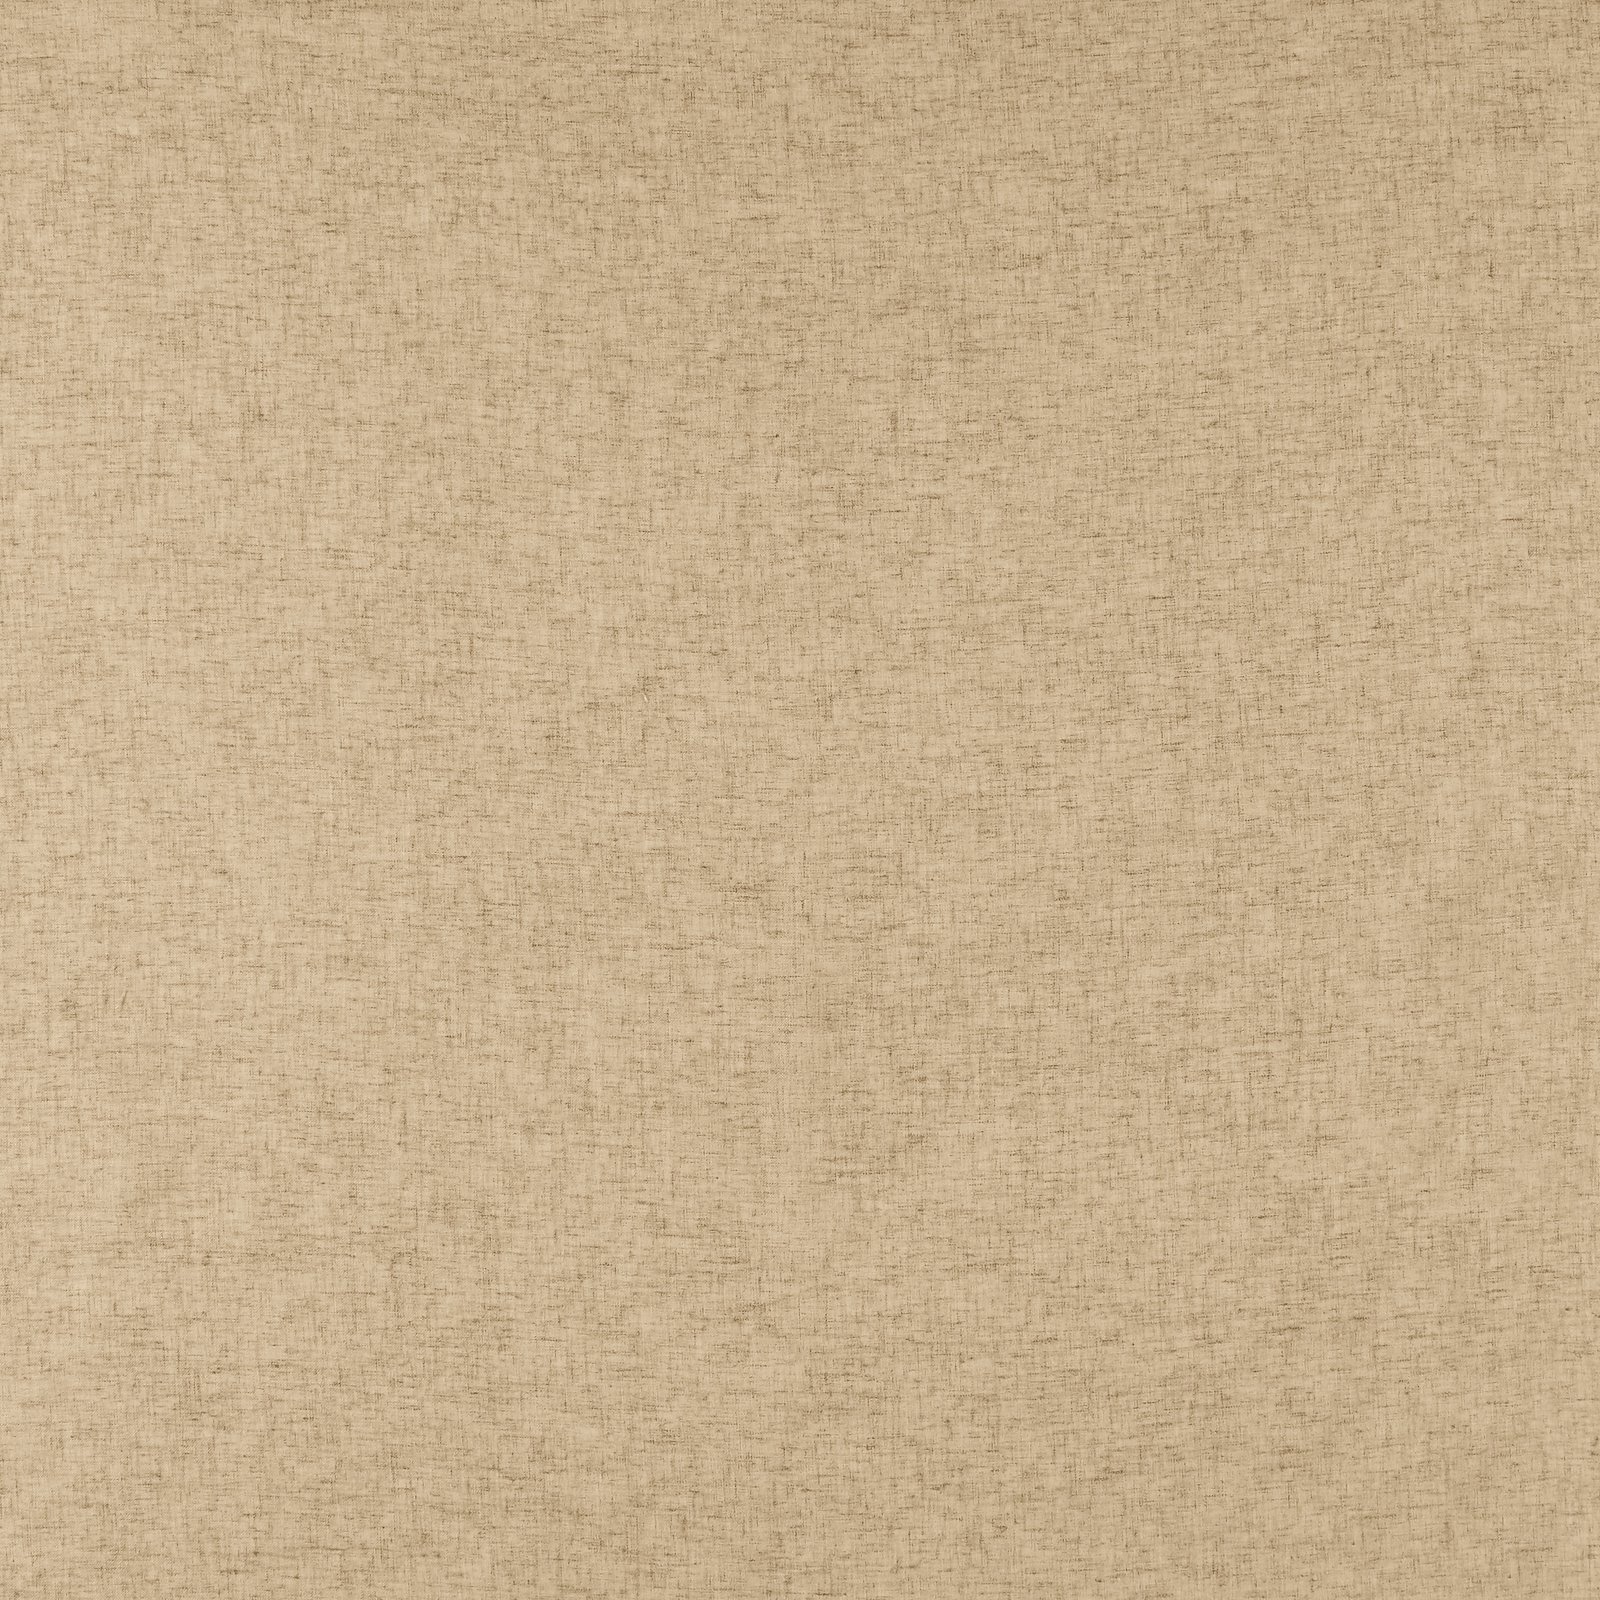 Voile beige polyester/lin mix 835174_pack_solid